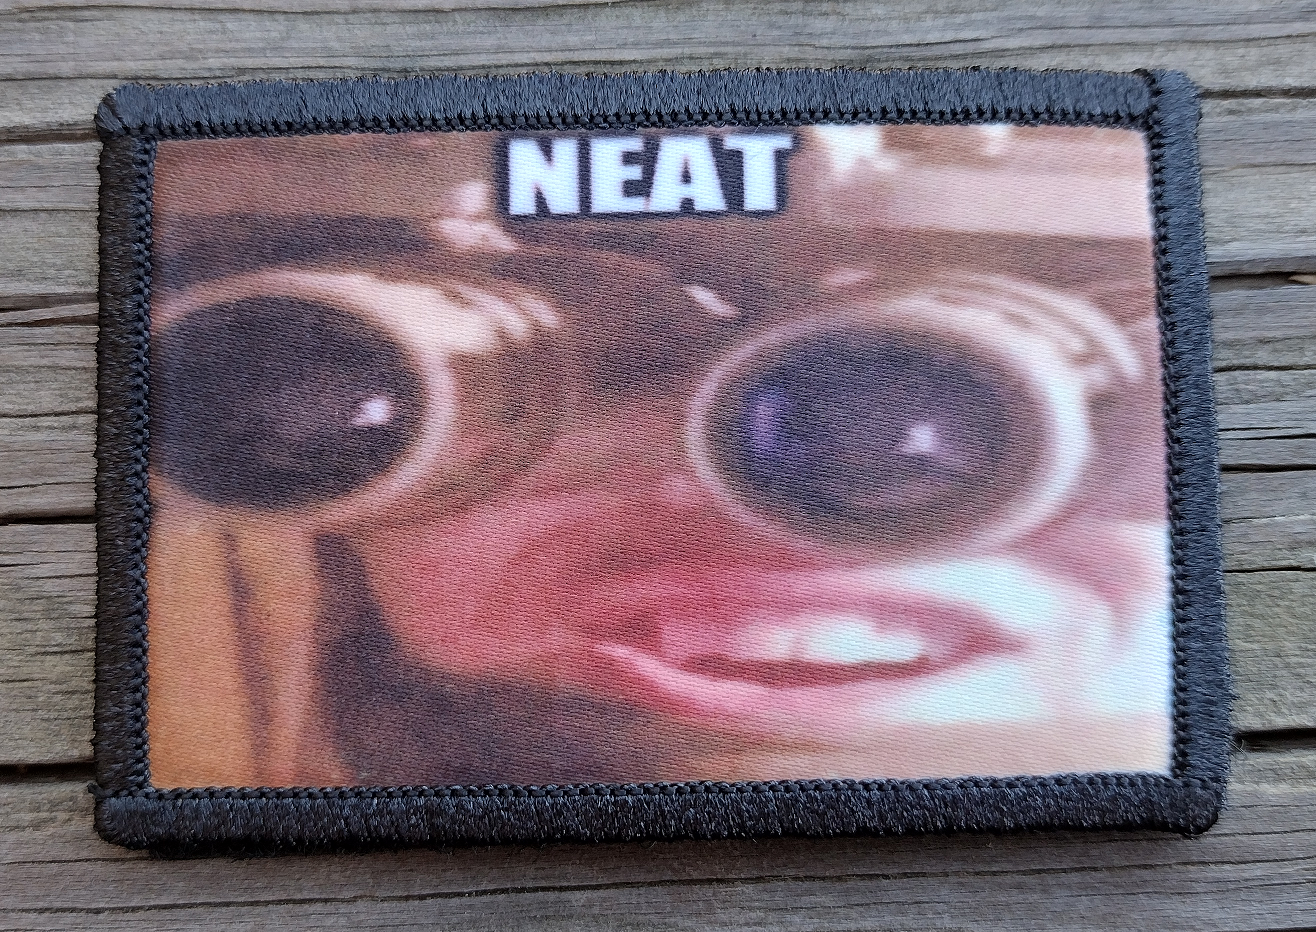 Nightvision Neat Morale Patch